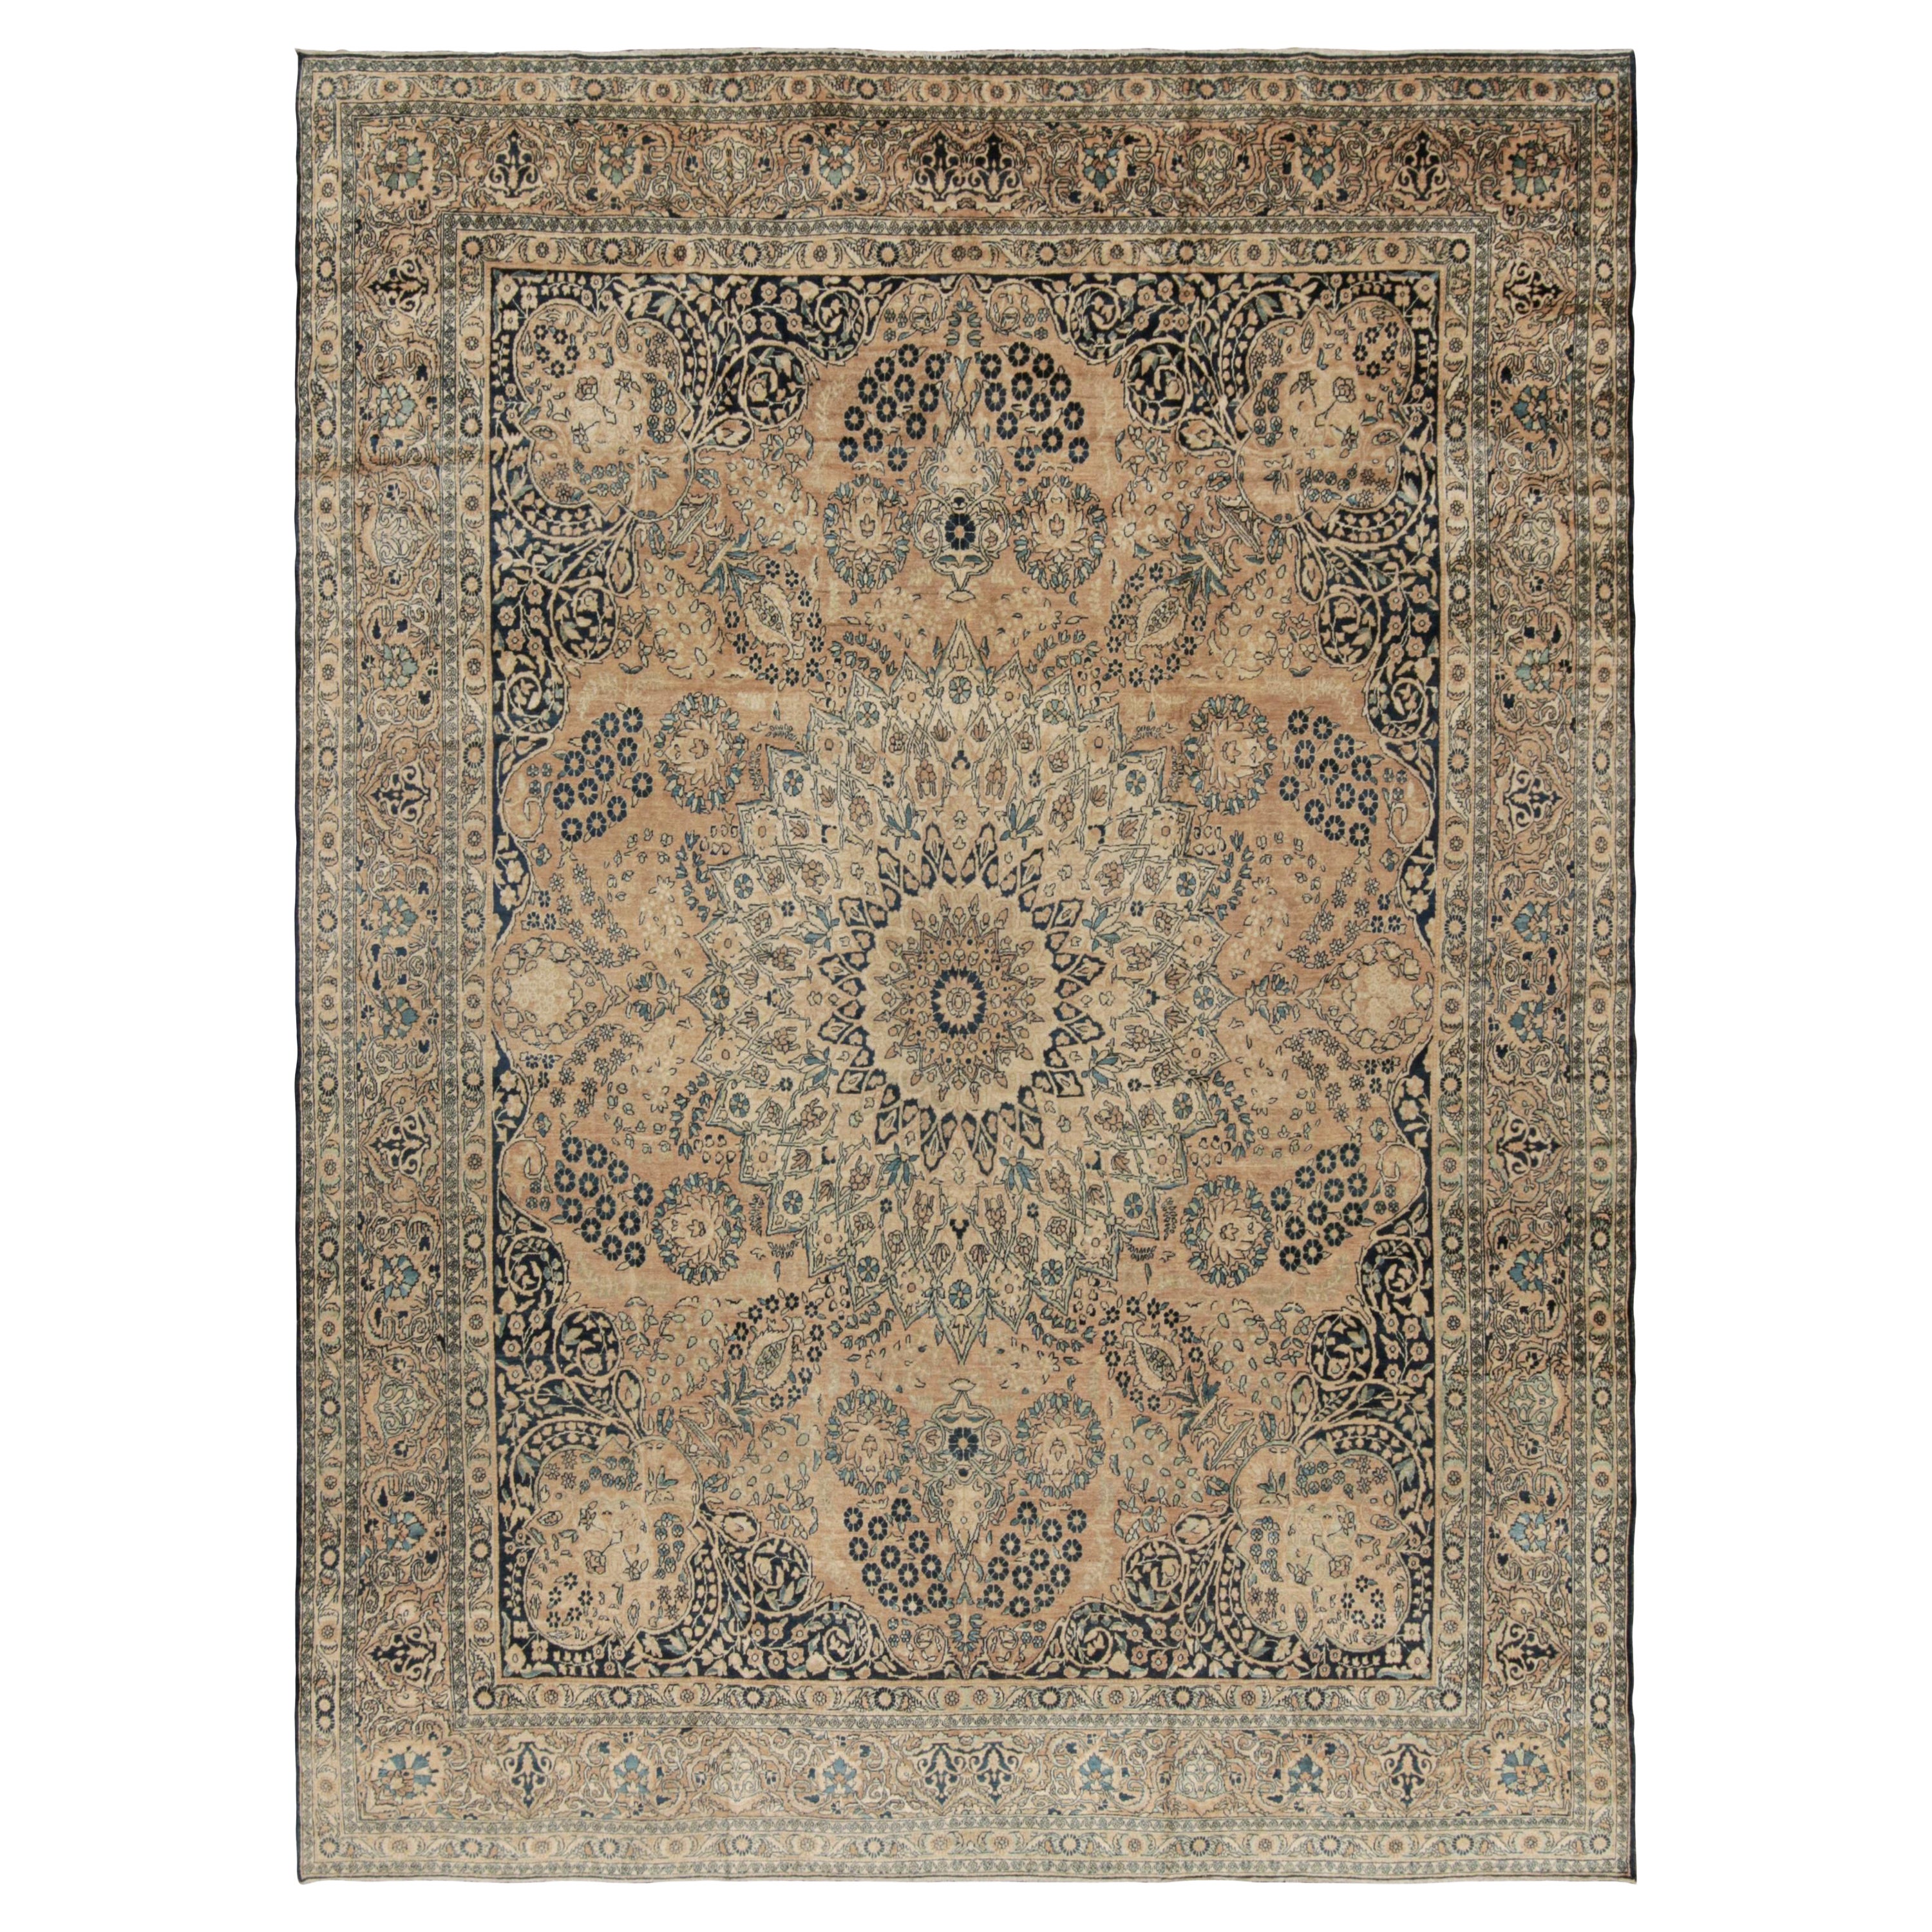 Antique Persian Yazd Rug in Gold-Blue Floral Patterns by Rug & Kilim 